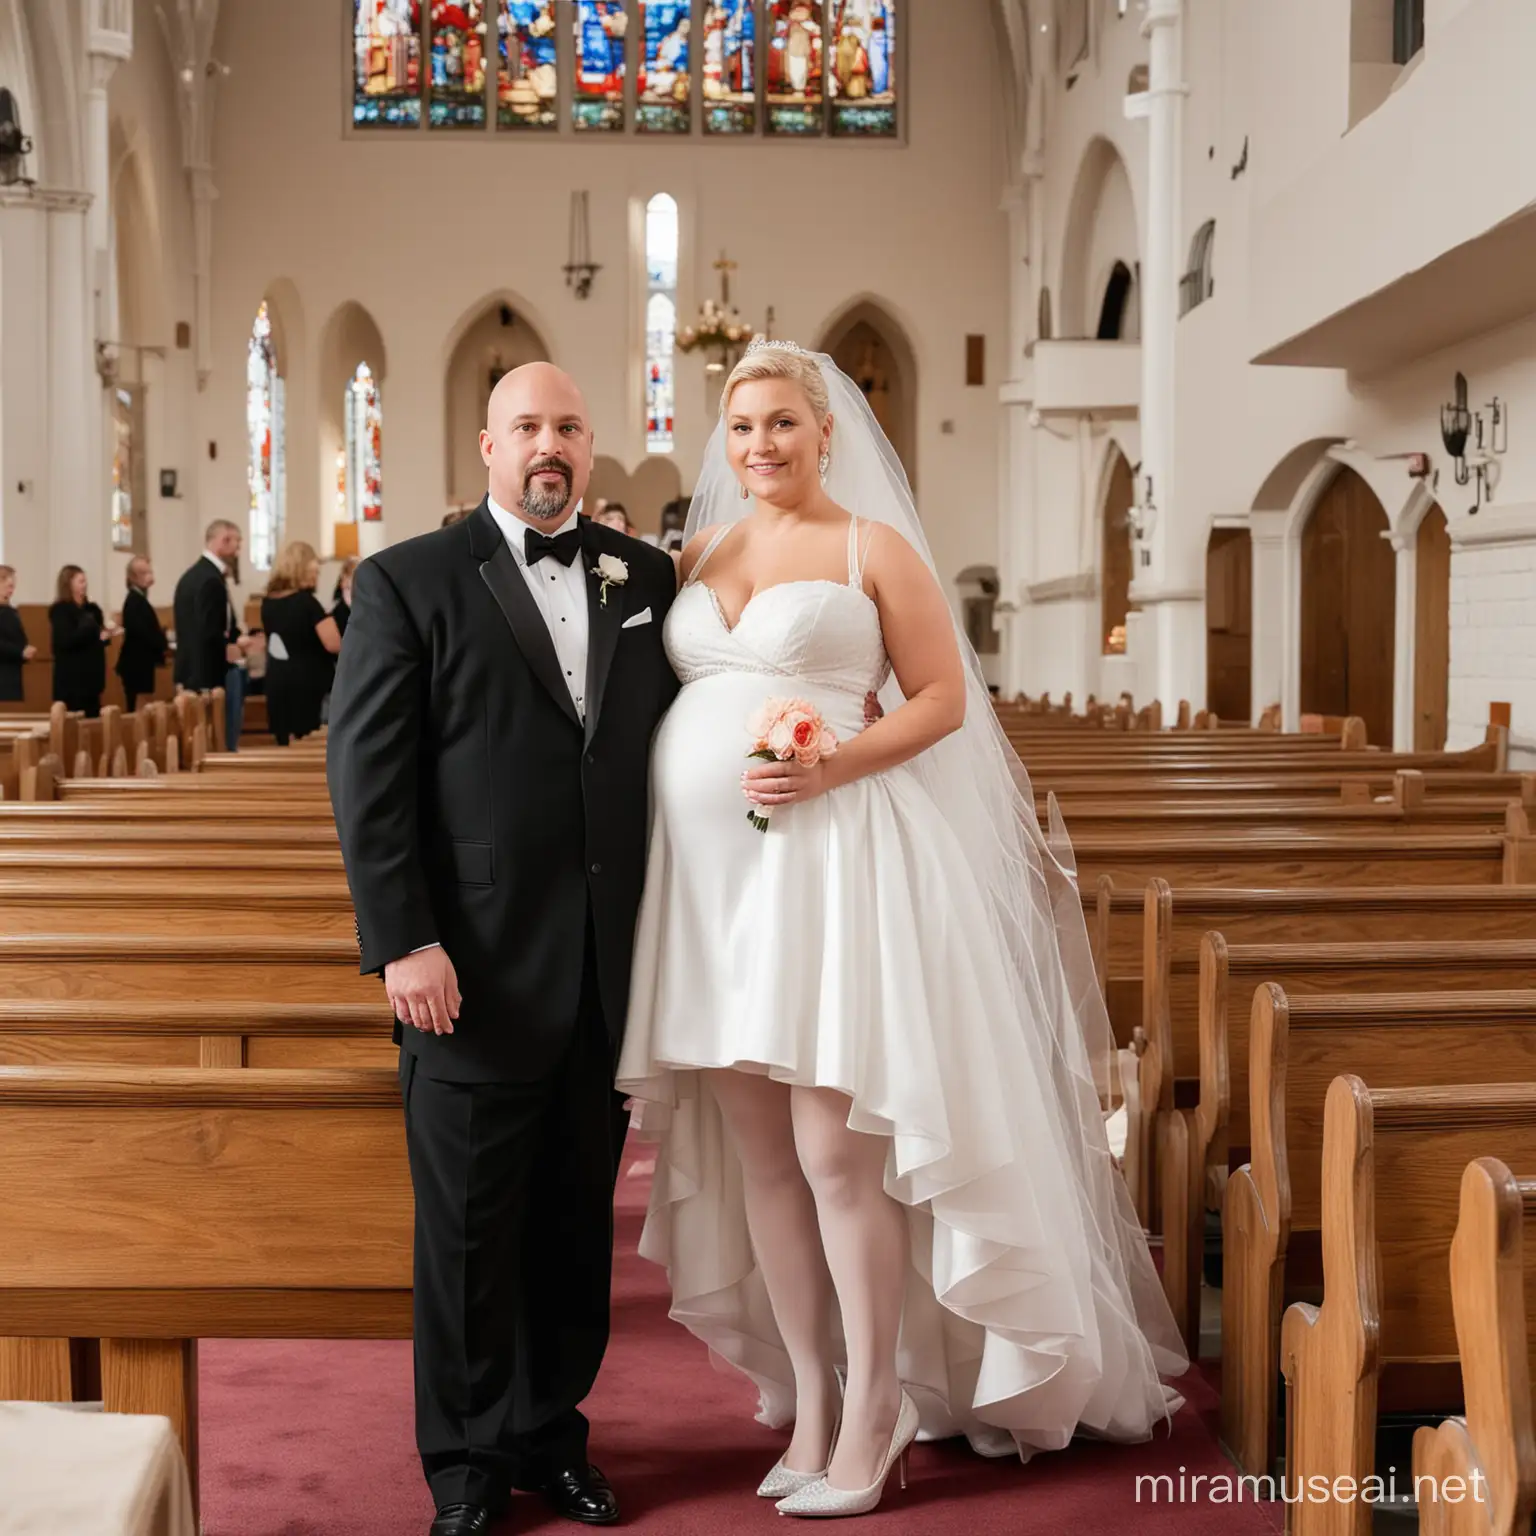 Mature Bride and Grooms Wedding Ceremony in Church